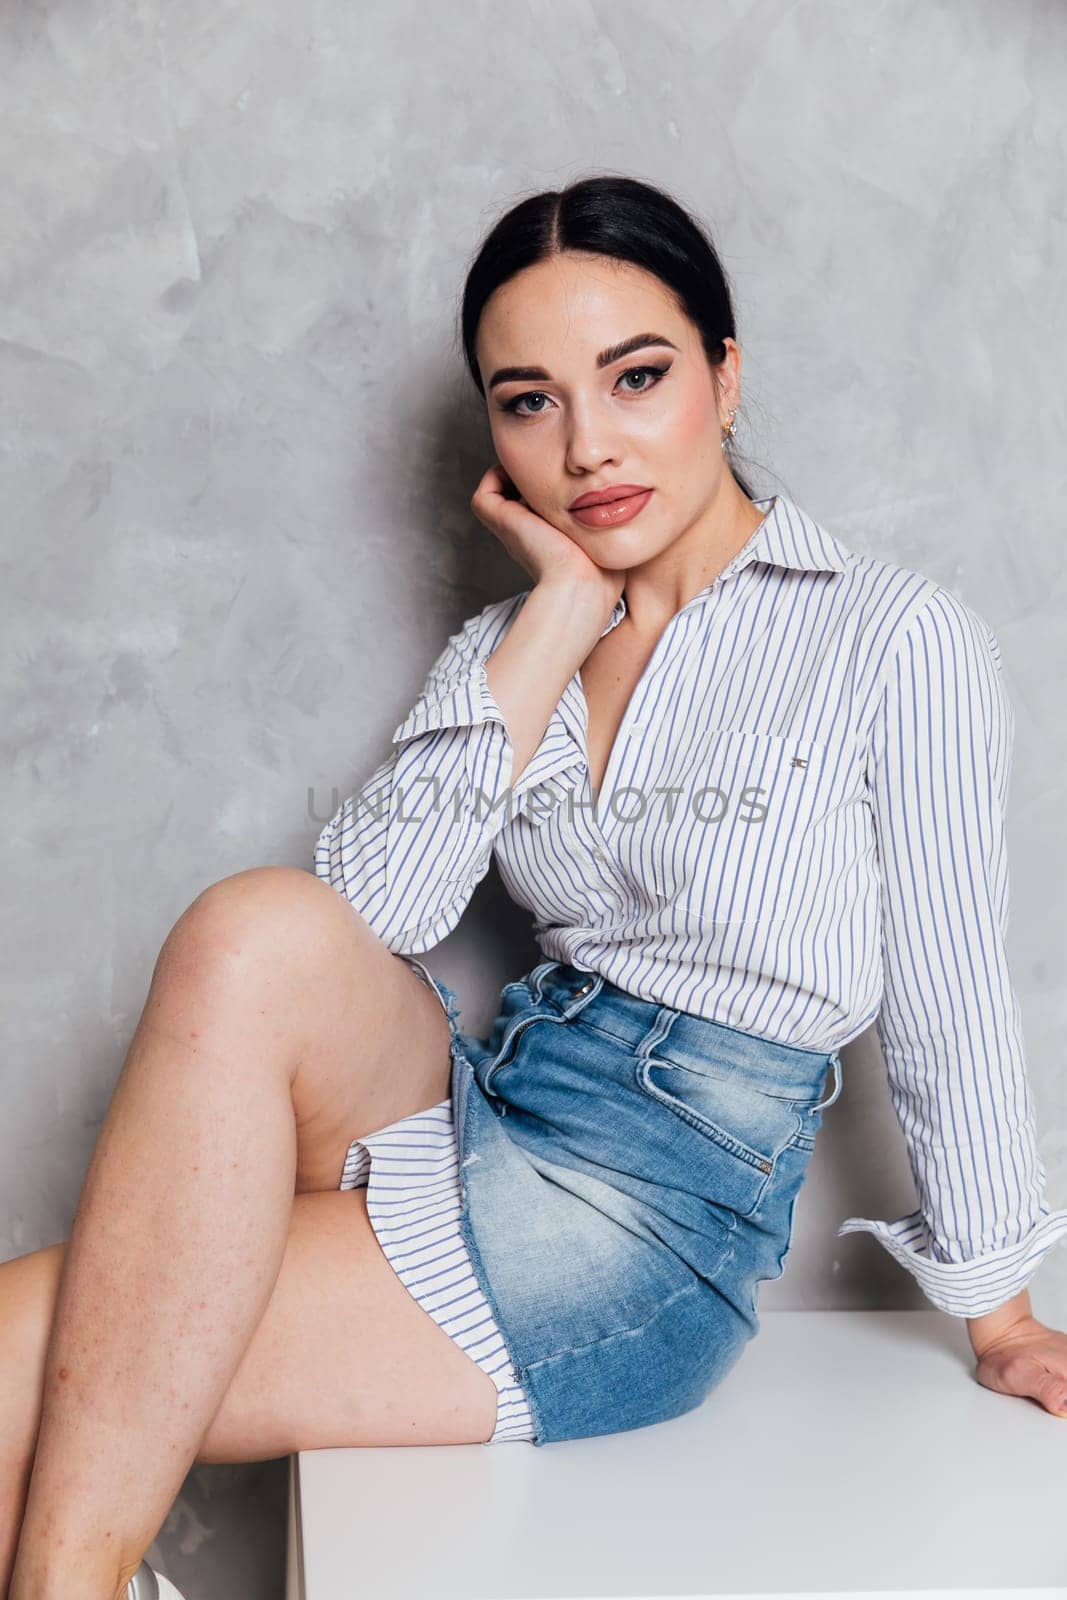 Beautiful fashionable woman in denim skirt posing in studio on gray background by Simakov